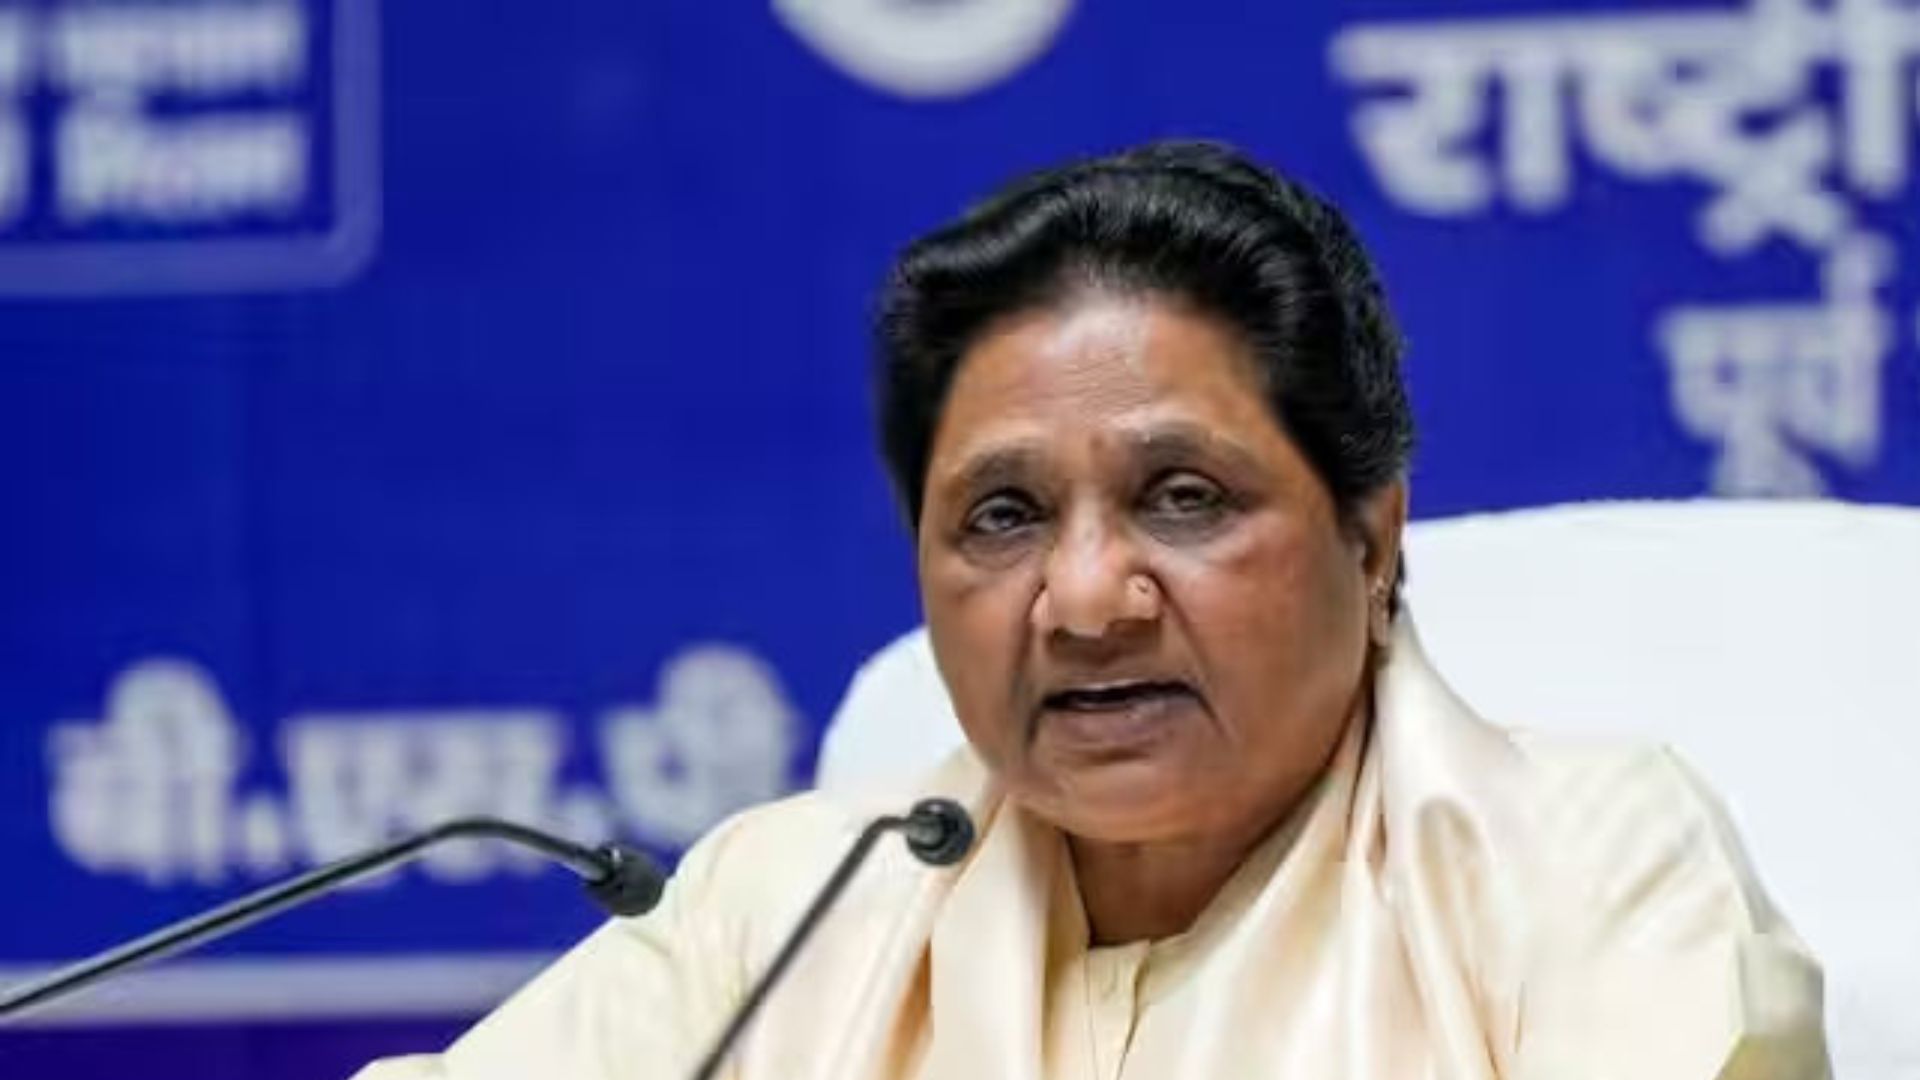 Mayawati Expresses Disappointment over Suspension of MPs: Calls it ‘Sad, Unfortunate’